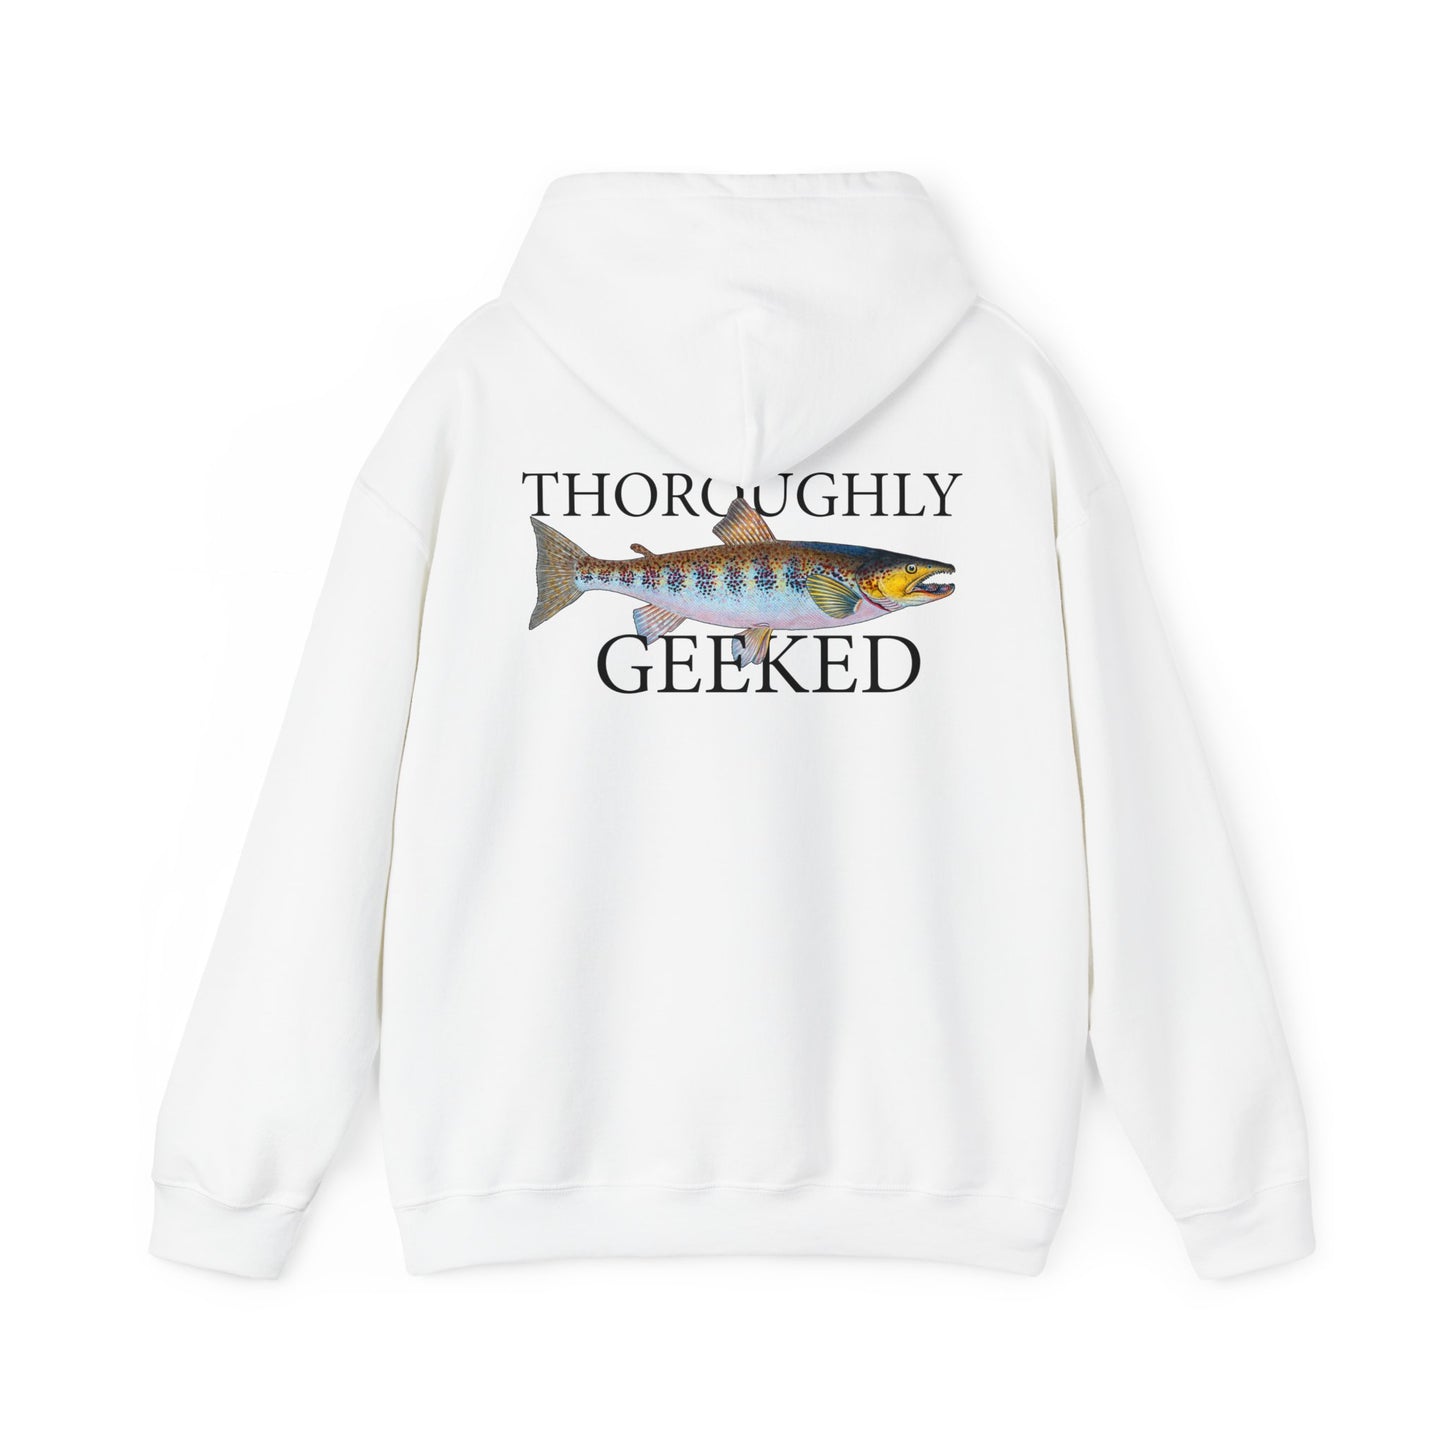 Thoroughly Geeked - Hooded Edition